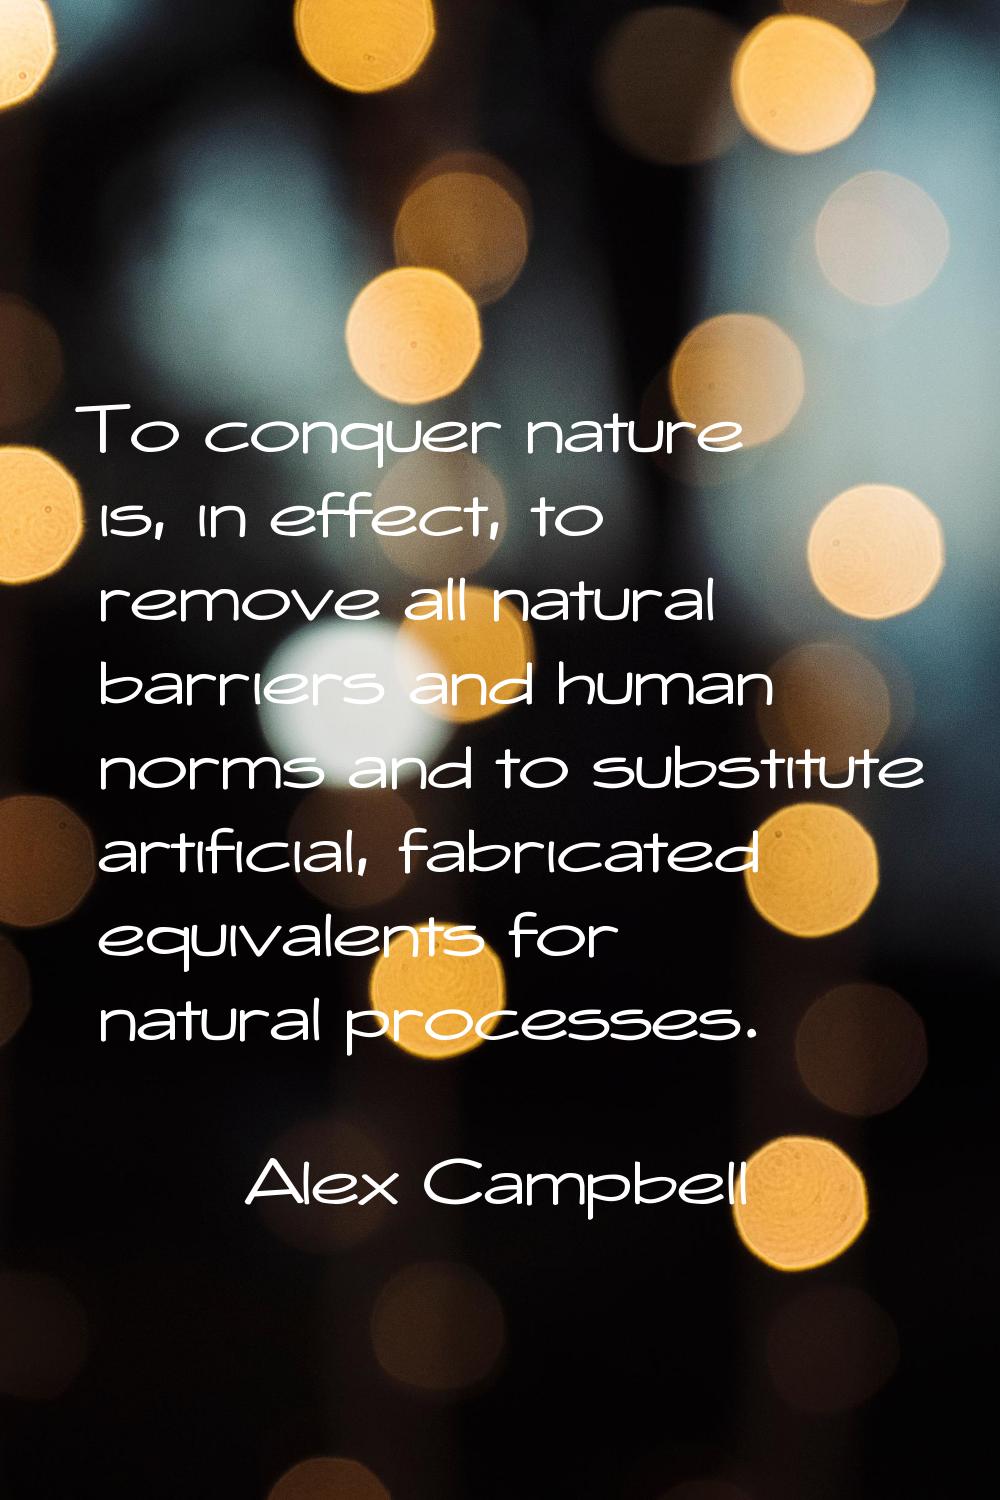 To conquer nature is, in effect, to remove all natural barriers and human norms and to substitute a